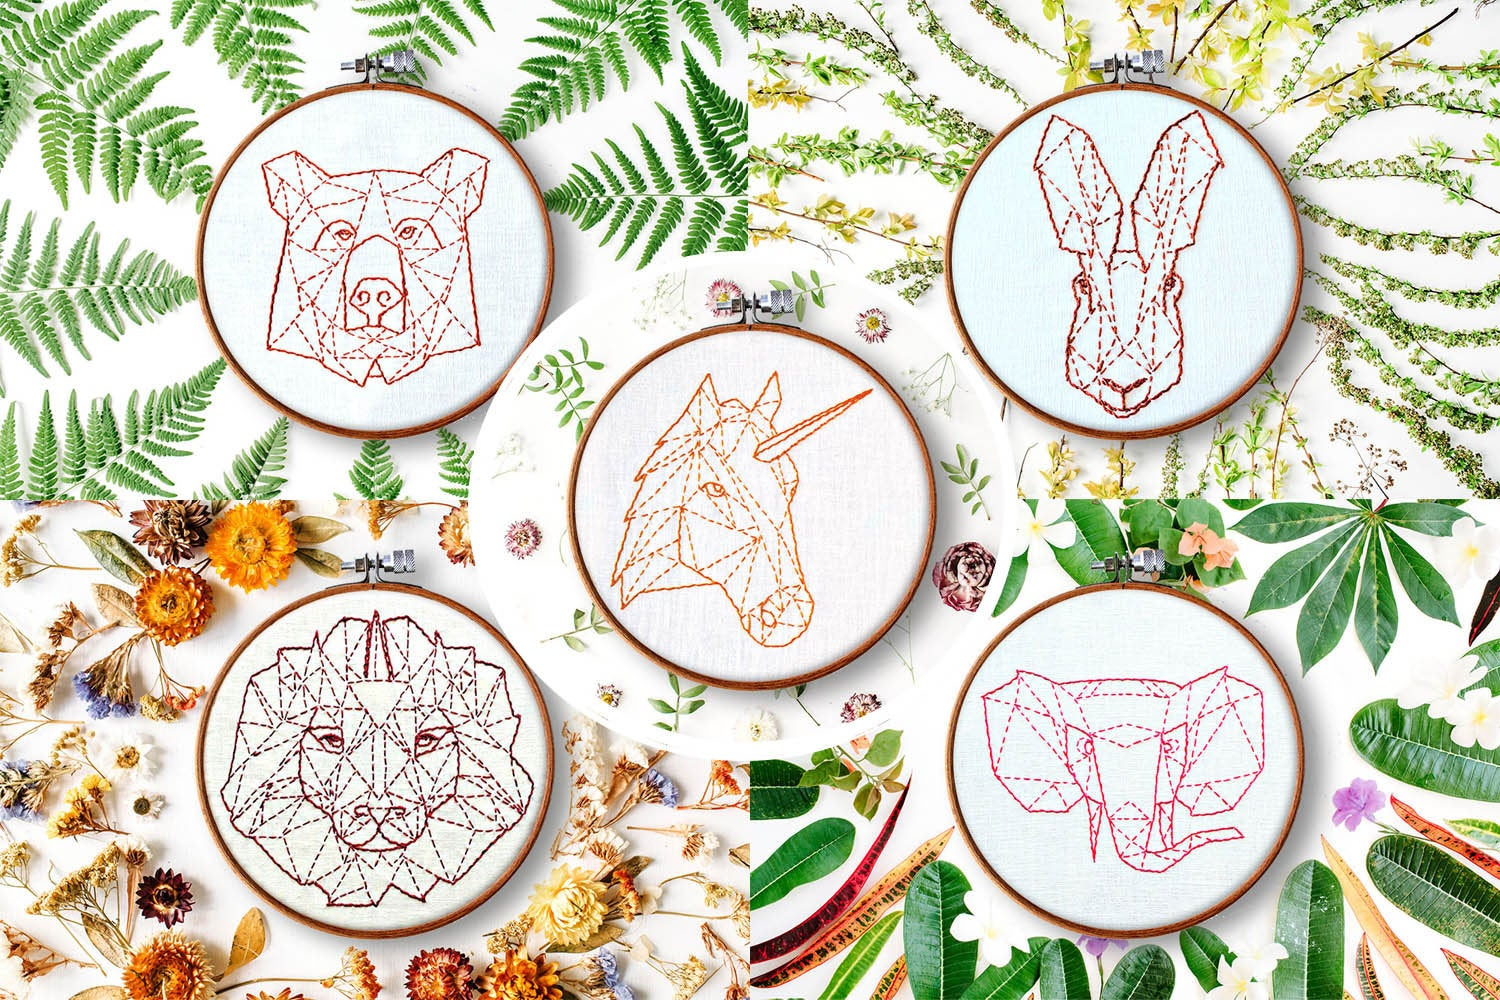 Norwegian Embroidery Patterns Modern Hand Embroidery Patterns Geometric Animals Beginner Embroidery Embroidery Ideas Contemporary Embroidery Rustic Home Decor